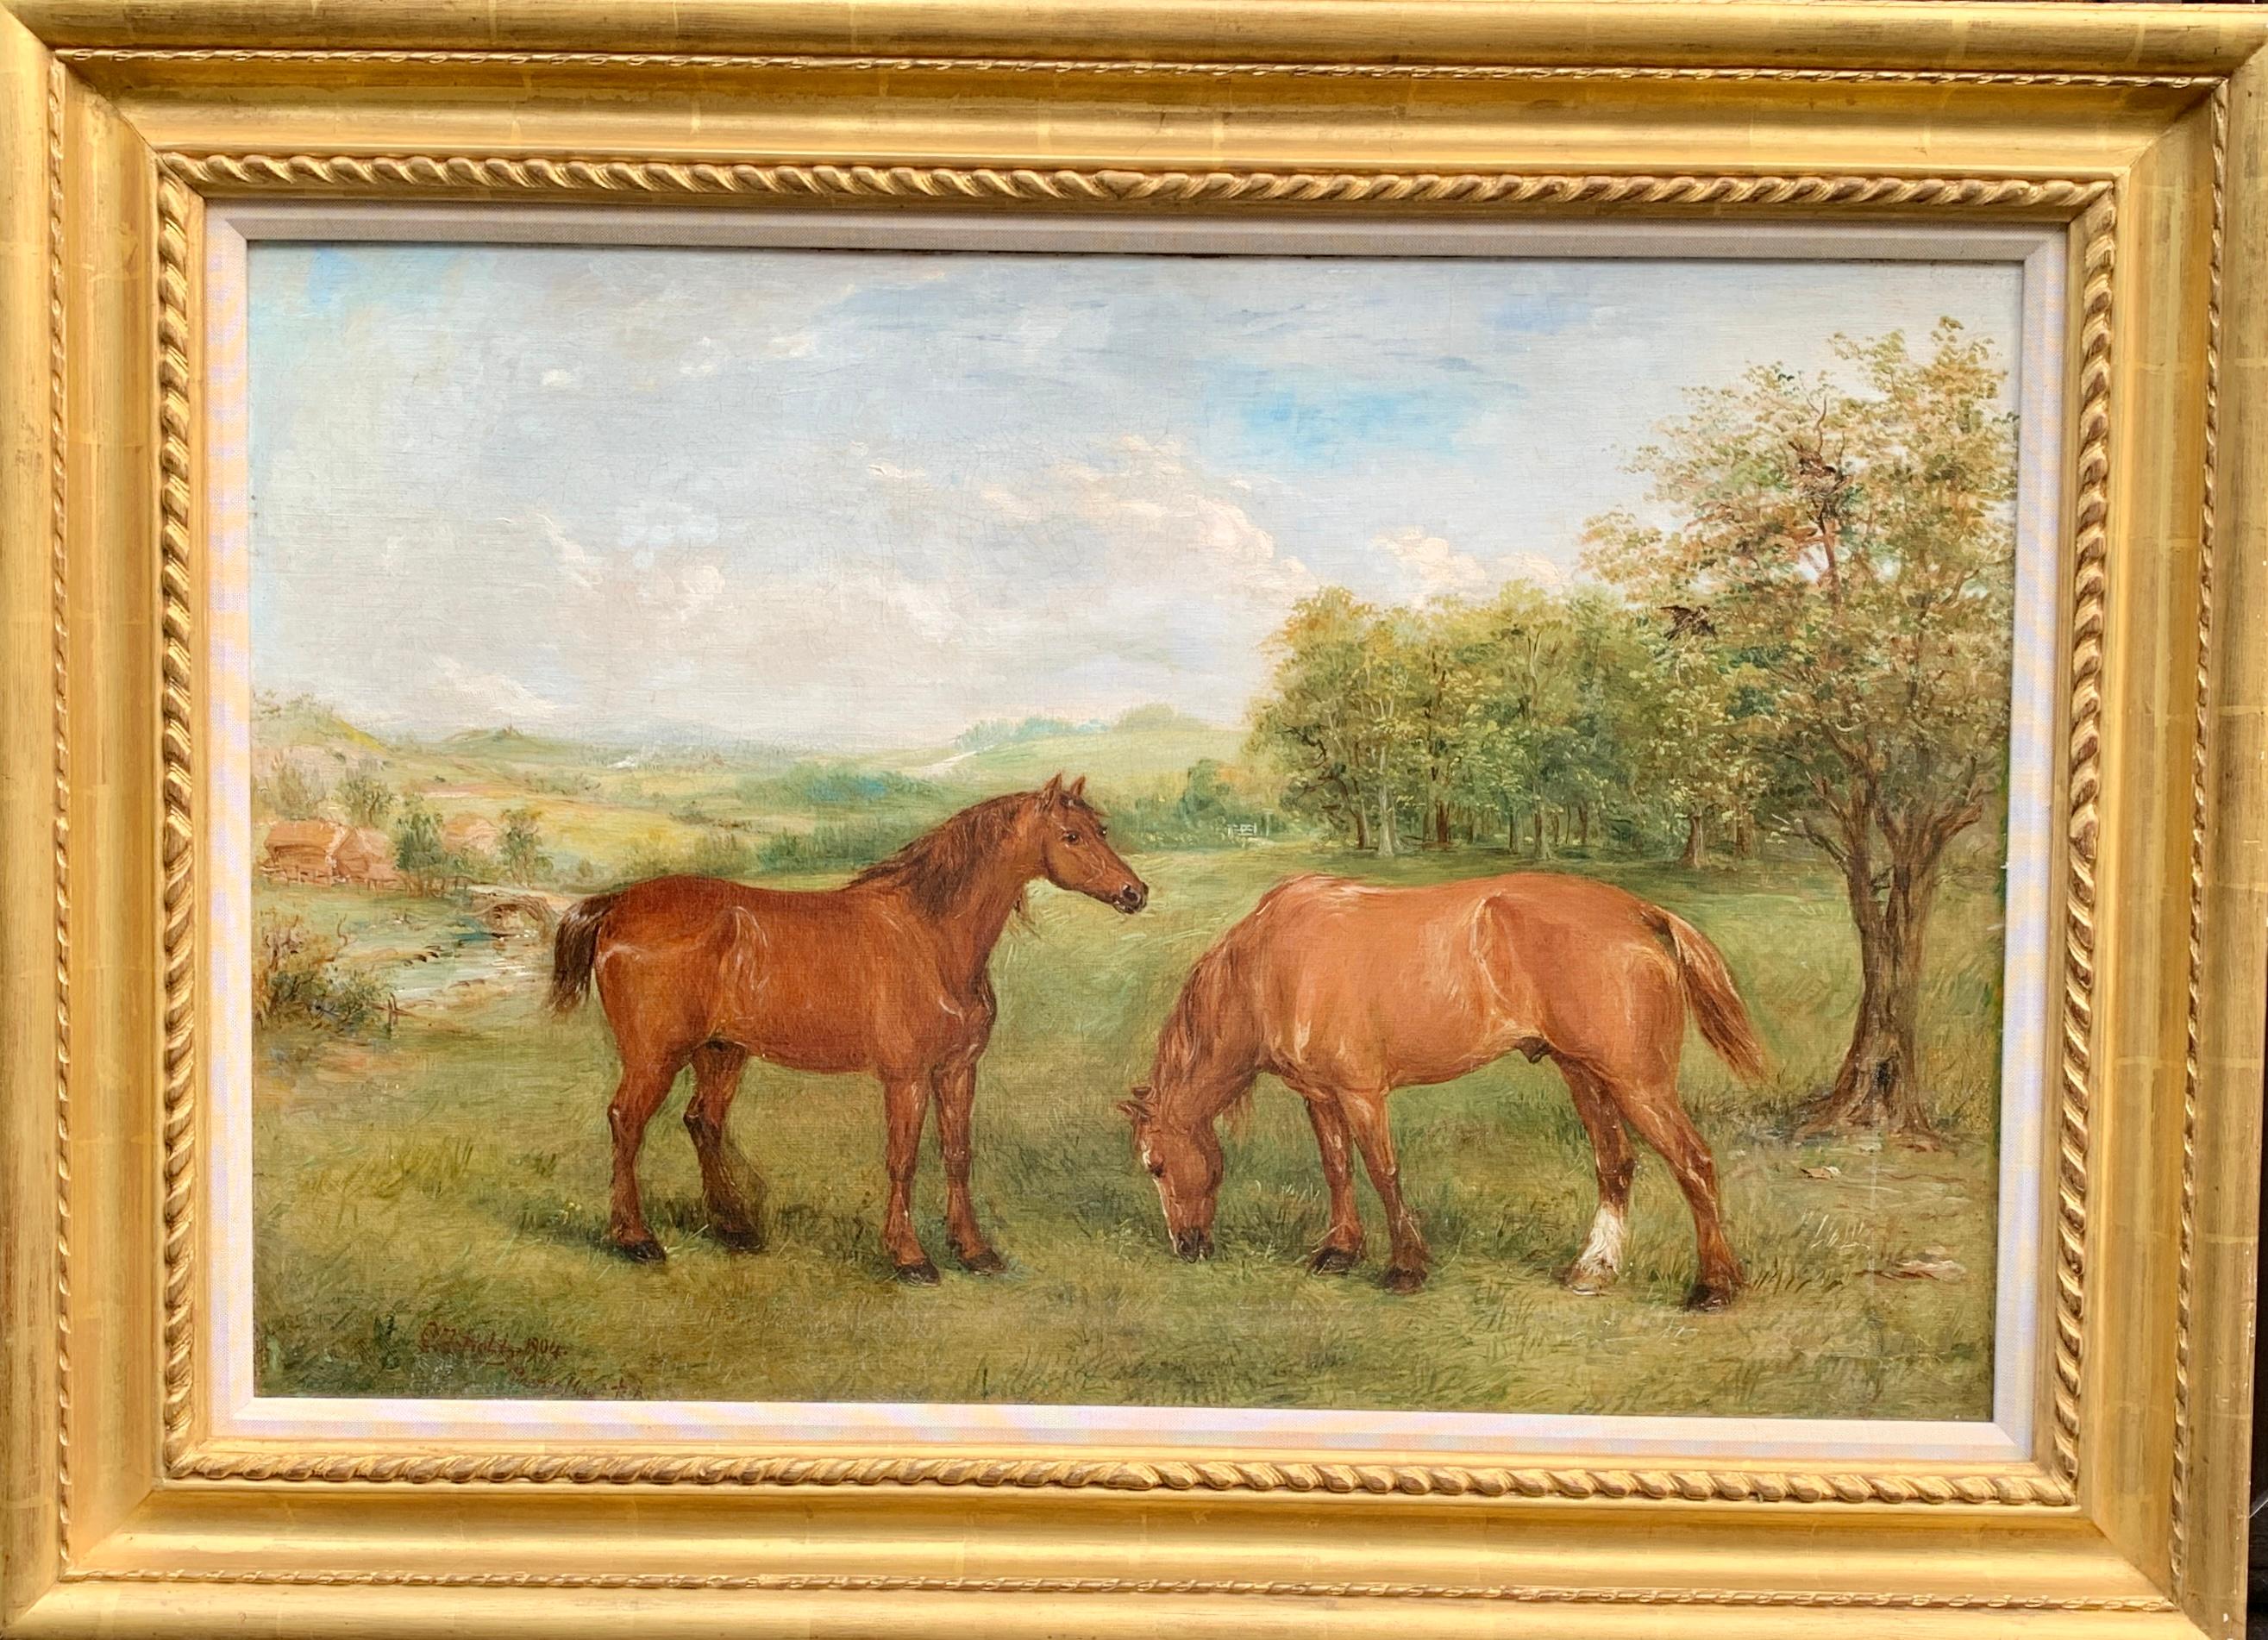 Early 20th century portrait of  shire or Clydesdale horses in a landscape.